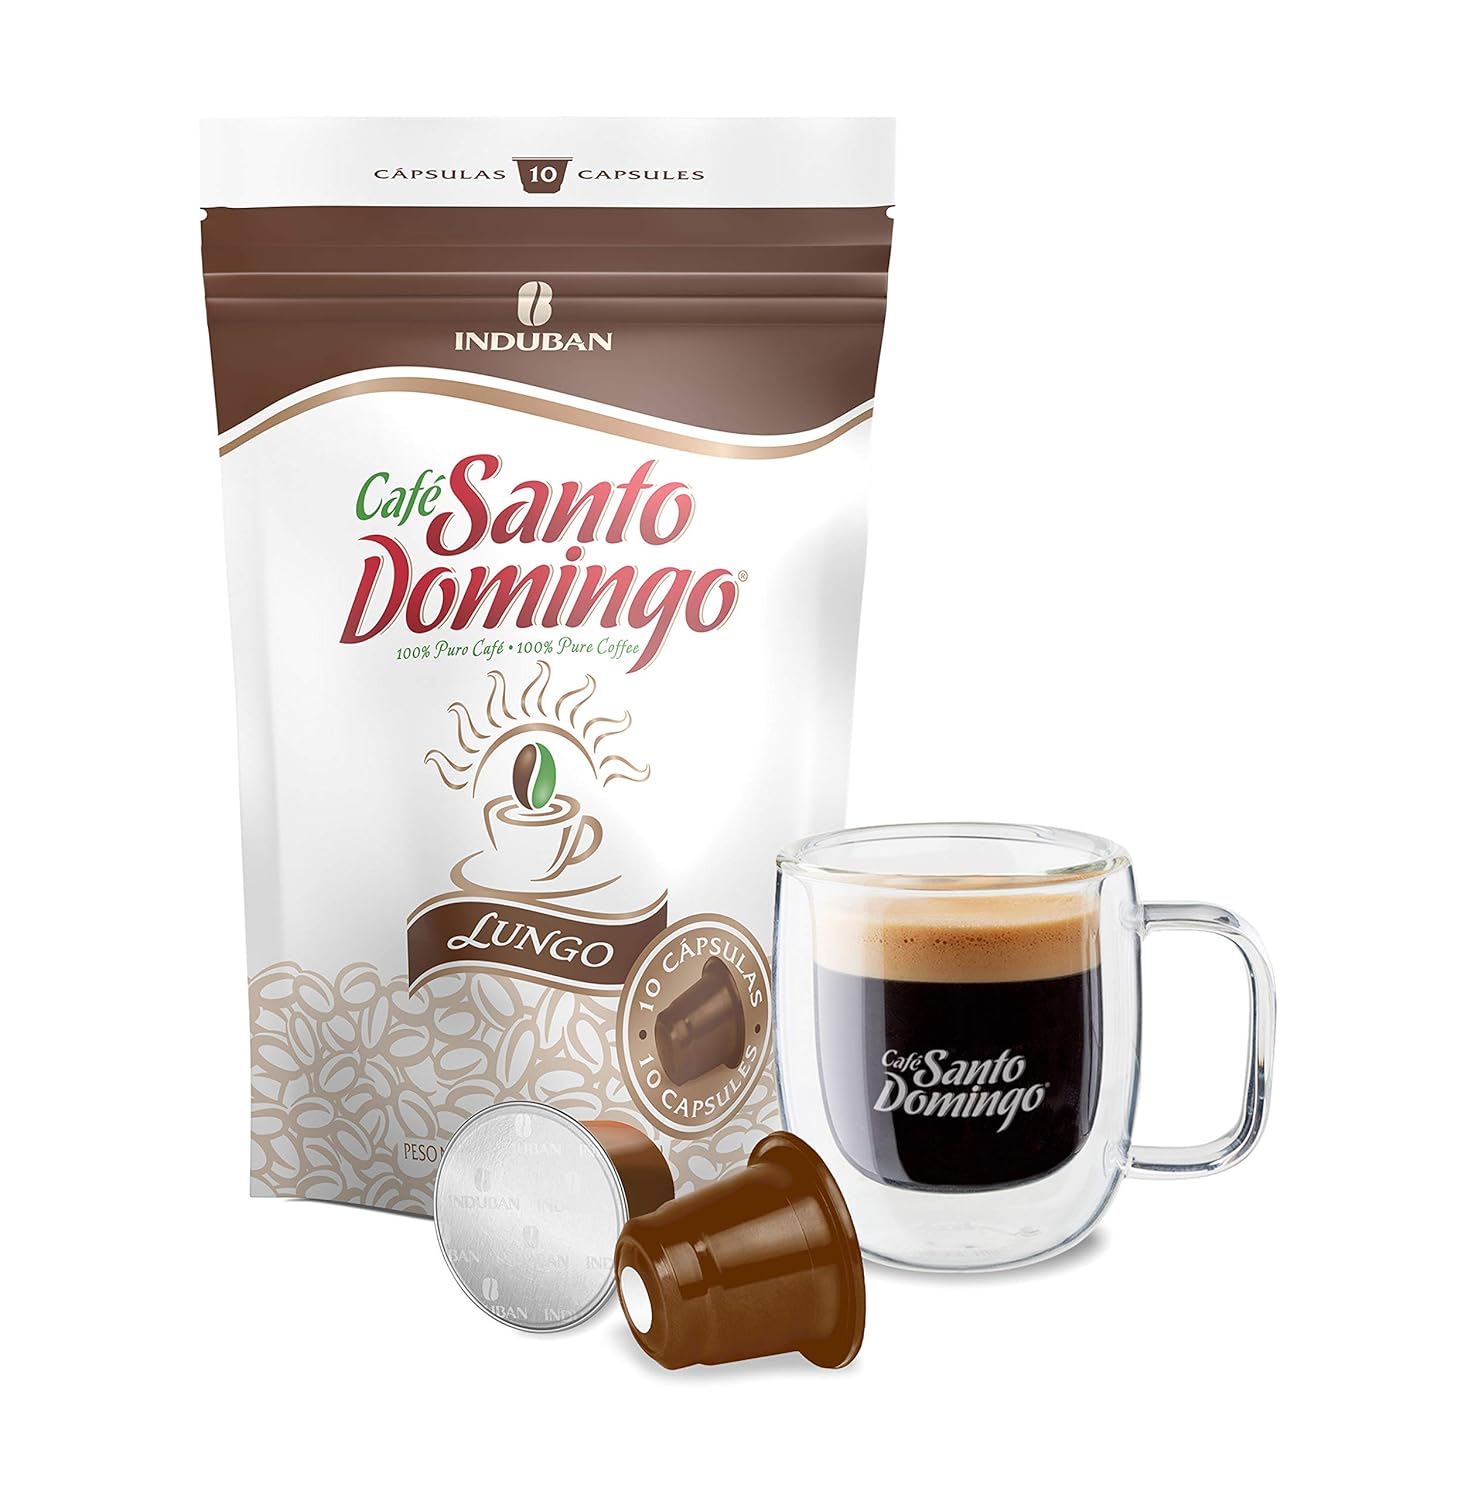 Santo Domingo Coffee Lungo Capsules - Compatible with Nespresso Original Brewers - Product from the Dominican Republic (10 Count) : Grocery & Gourmet Food